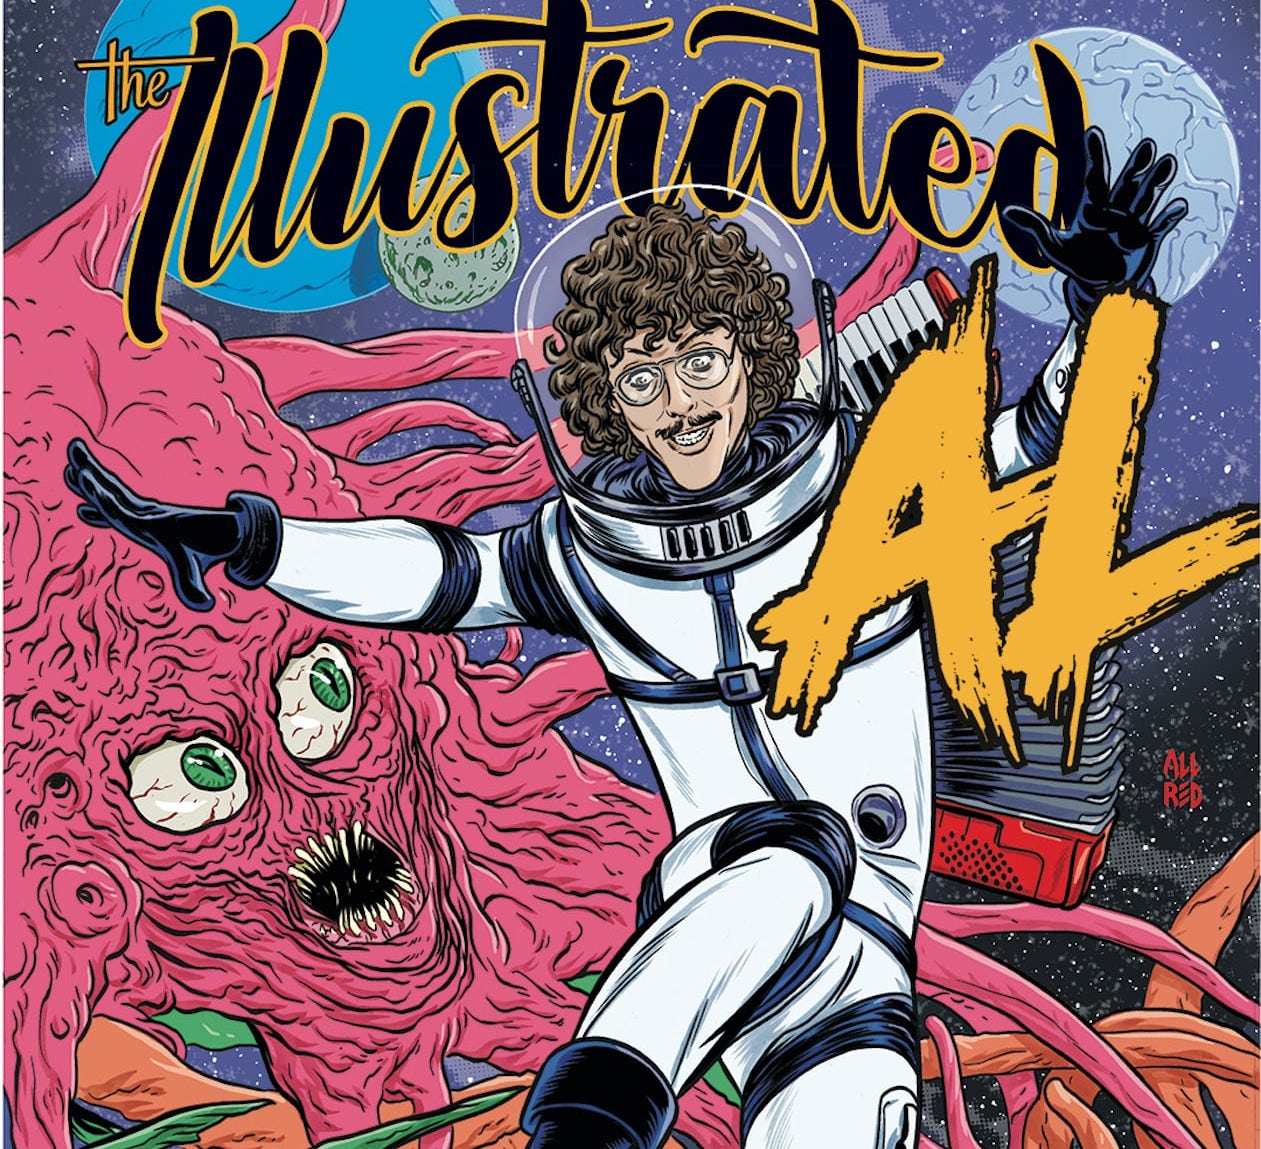 Weird Al and Z2 team up for 'The Illustrated Al' graphic novel